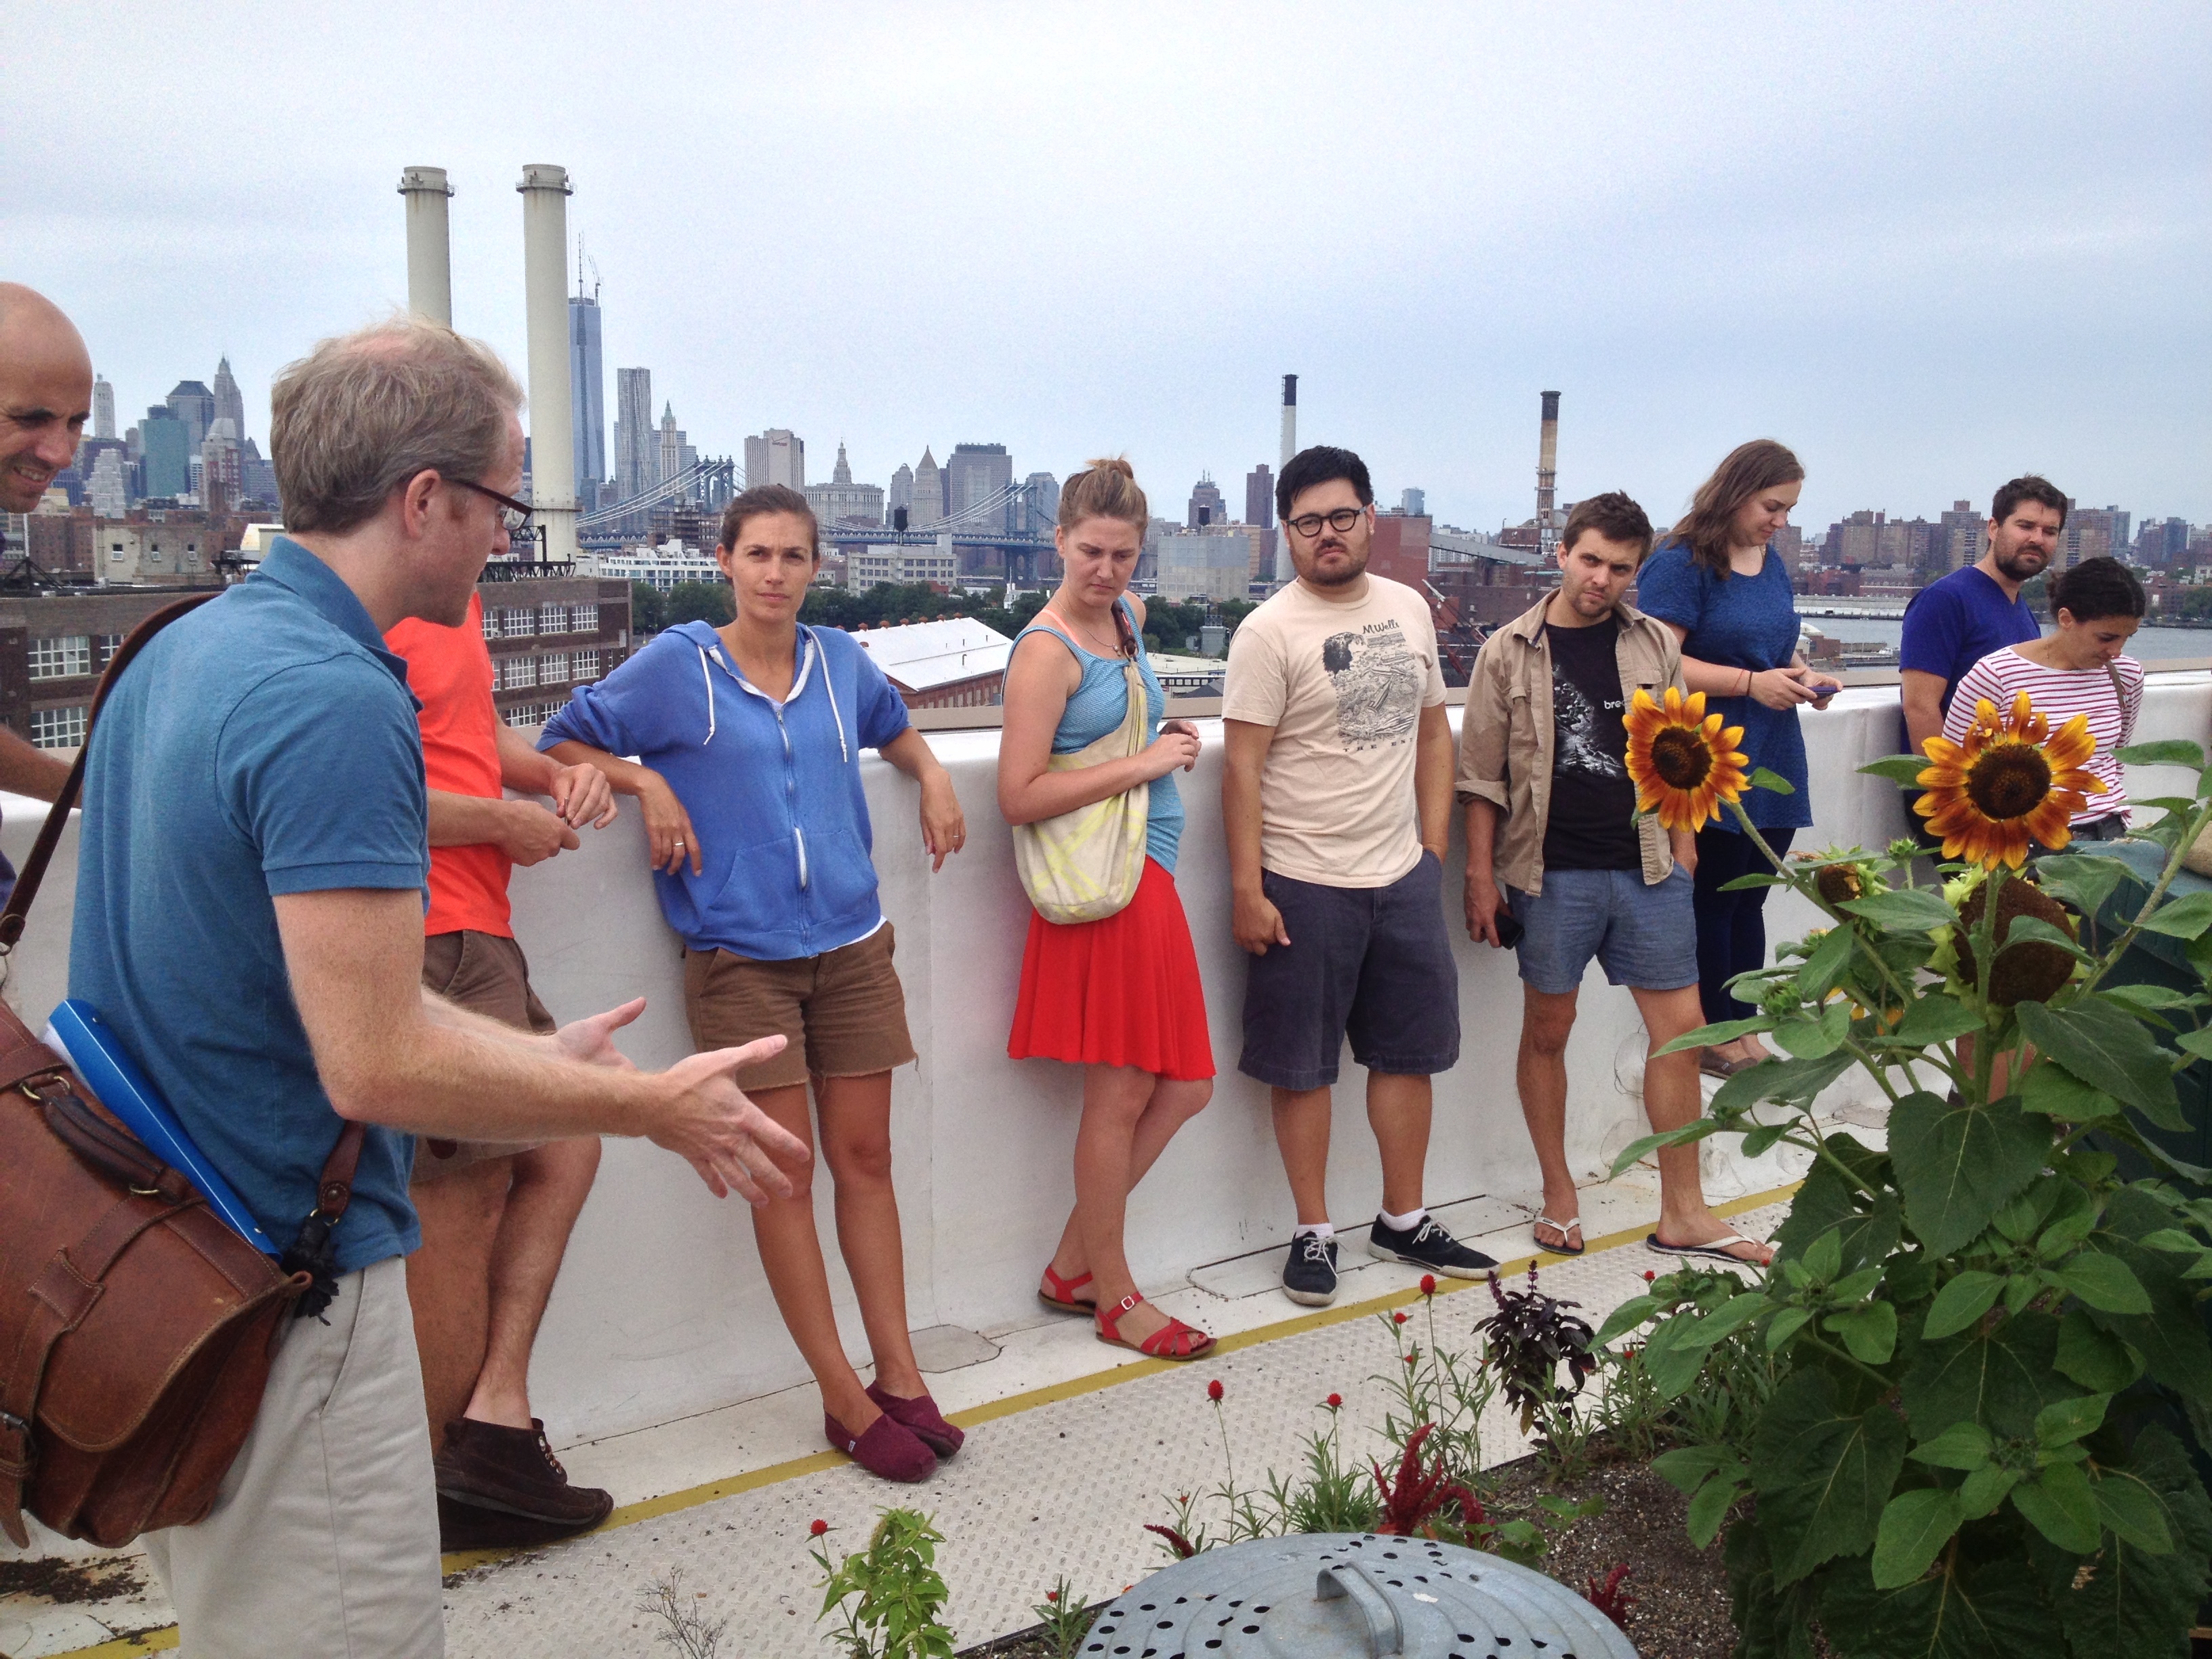 A tour stands on a roof facing their guide looking at him or at the roof, which includes sunflowers and lush vegetation, with smokestacks and the Manhattan skyline in the background